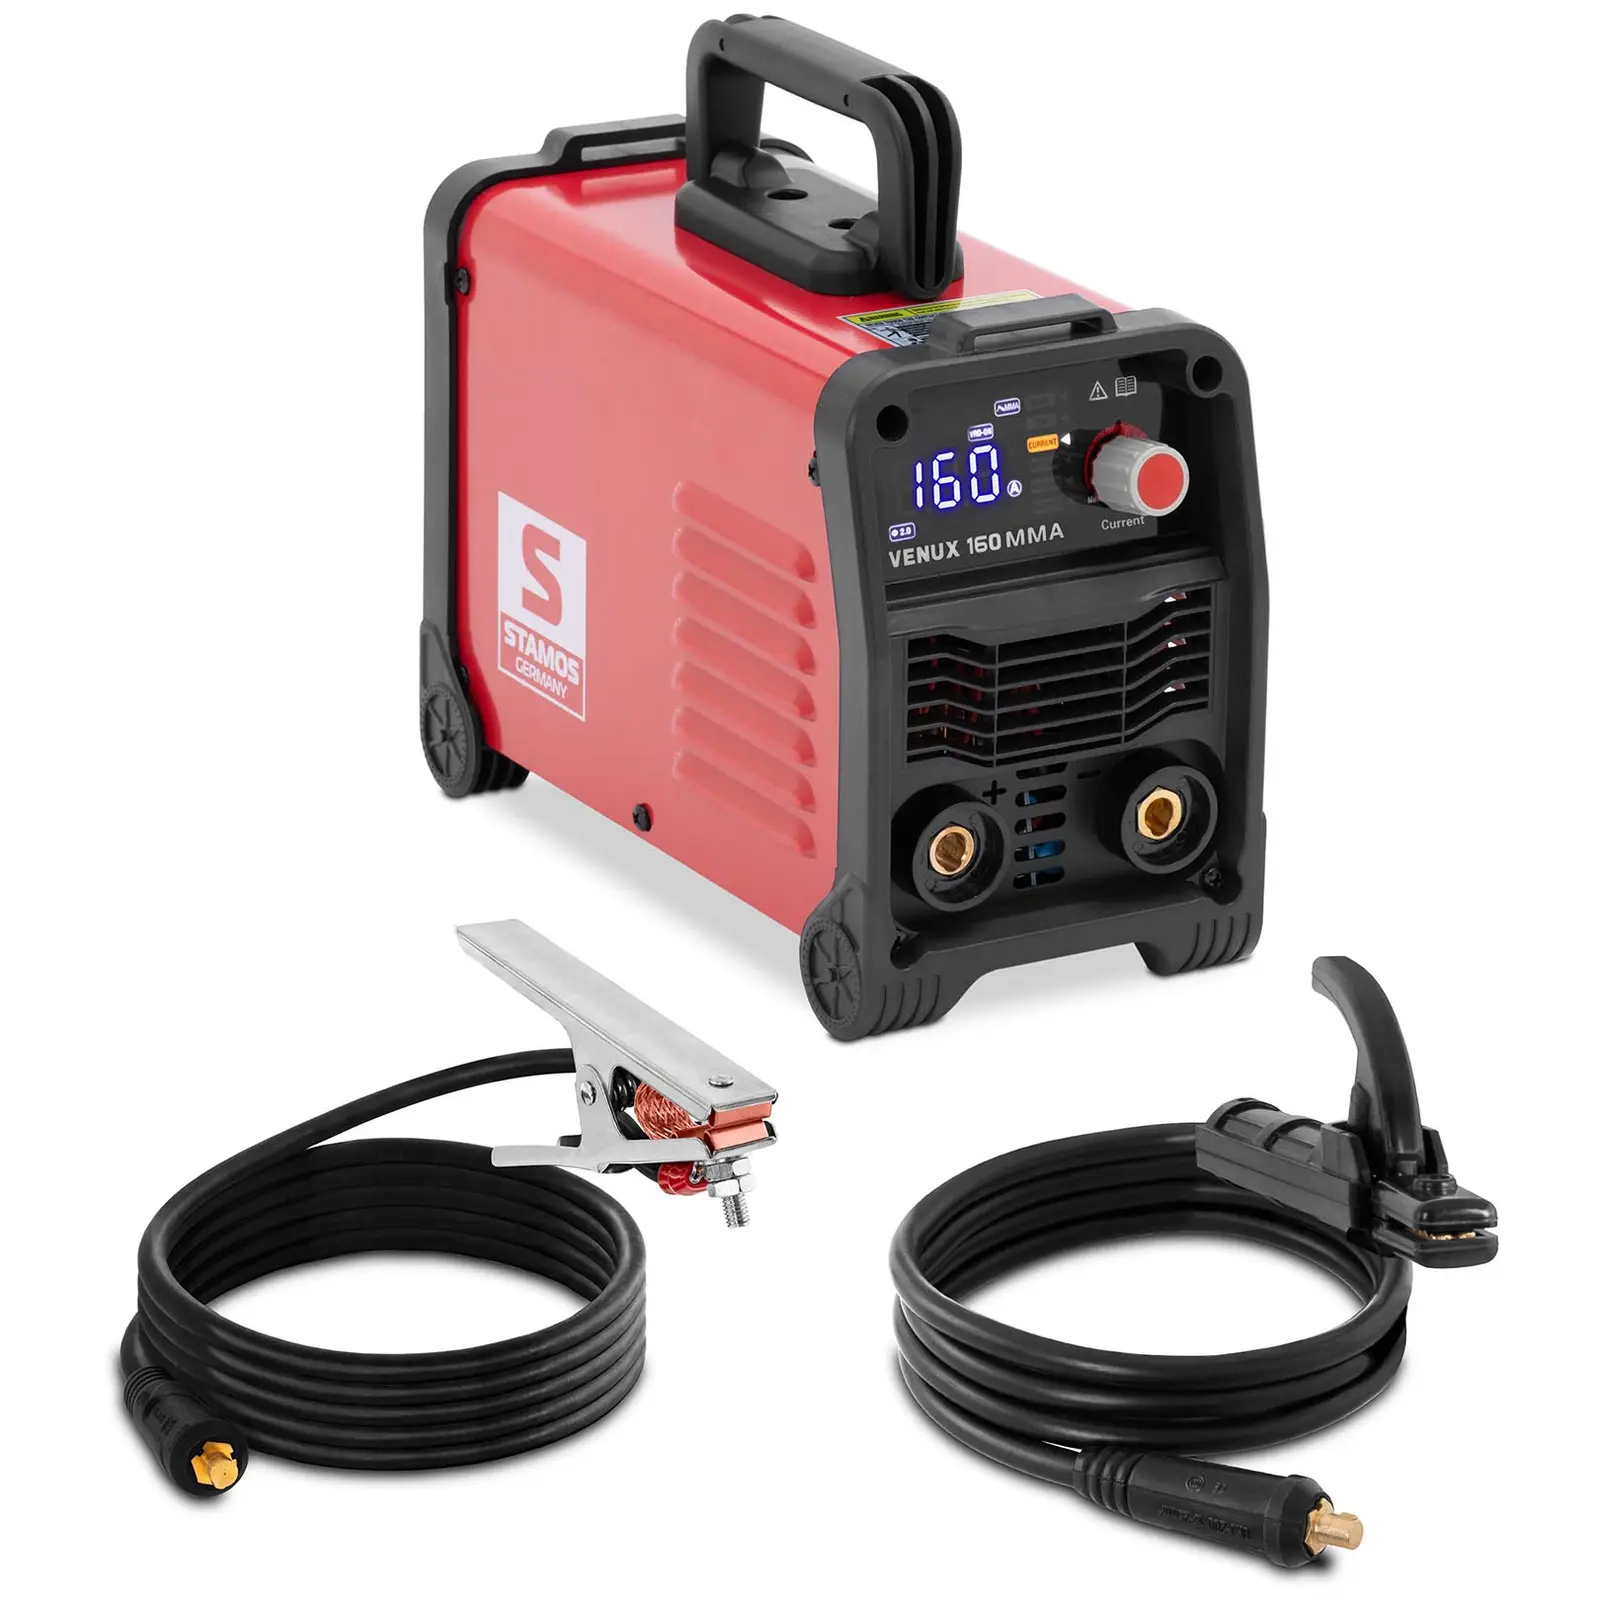 Arc Welder with Smart Select System - TIG Lift-Arc - 160 A - 60 % duty cycle - Hot Start - Arc Force - Anti-Stick - VRD